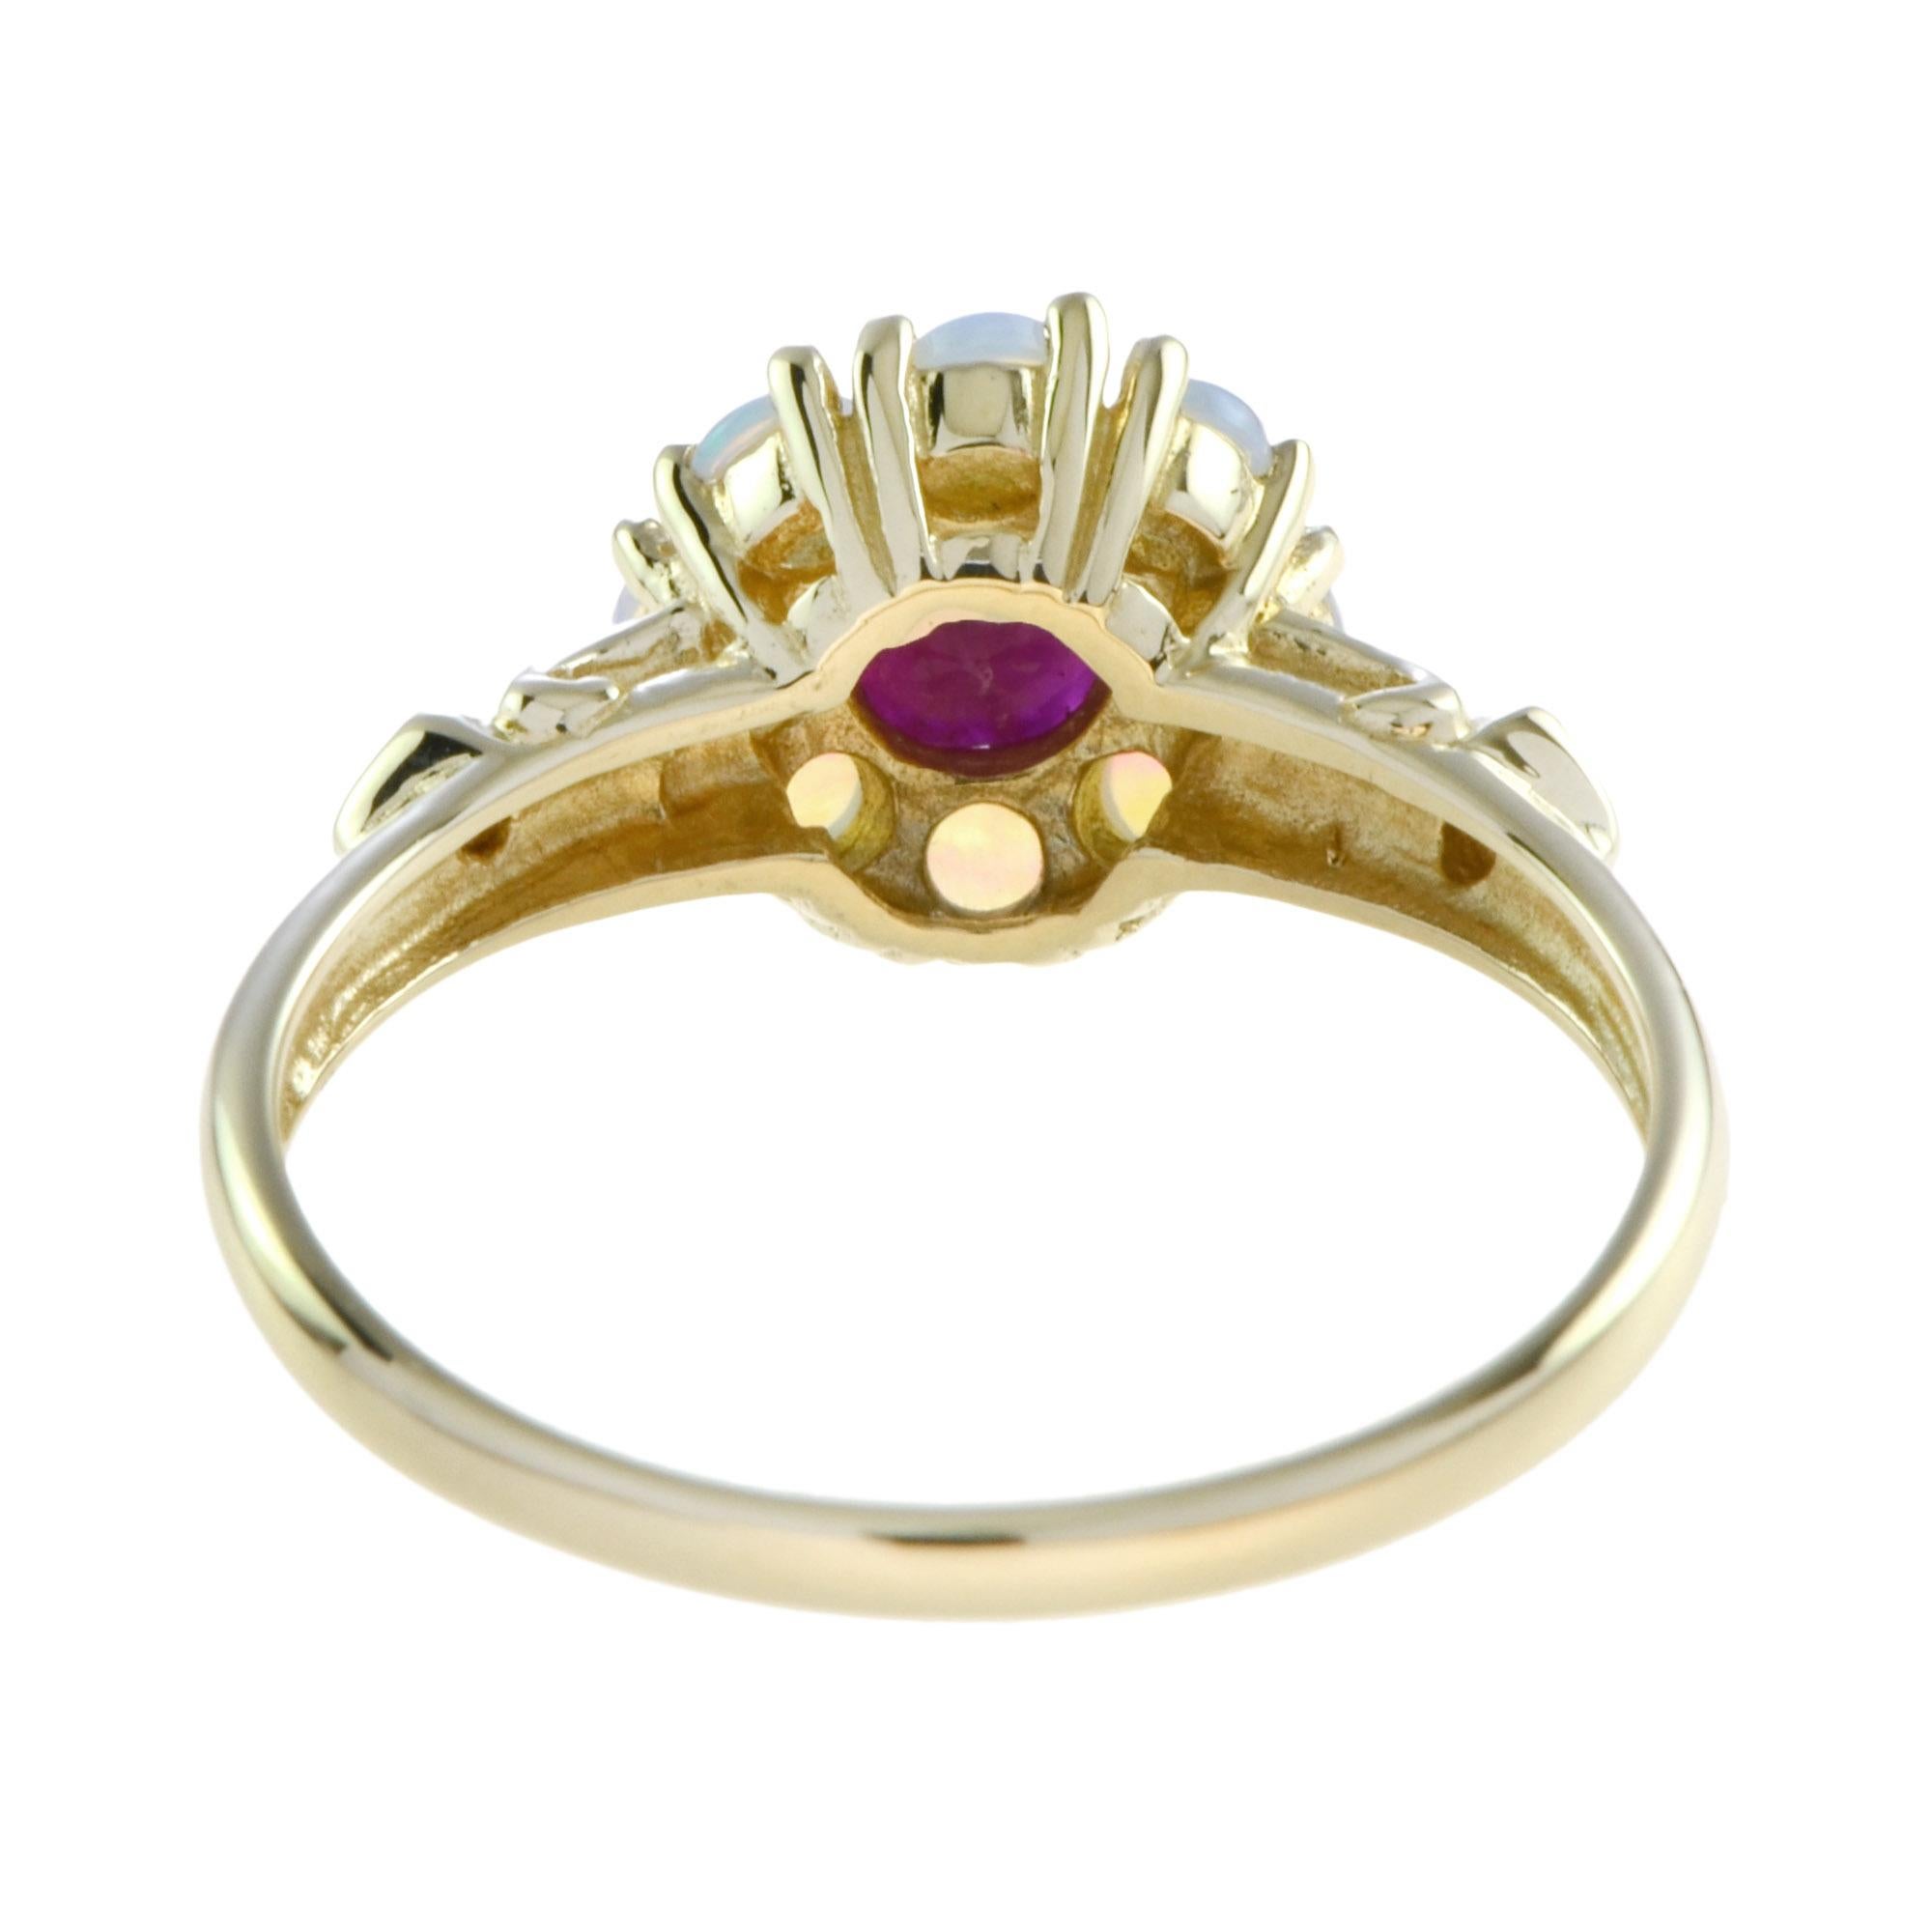 For Sale:  Vintage Style Ruby and Opal Floral Cluster Ring in 14K Yellow Gold 4